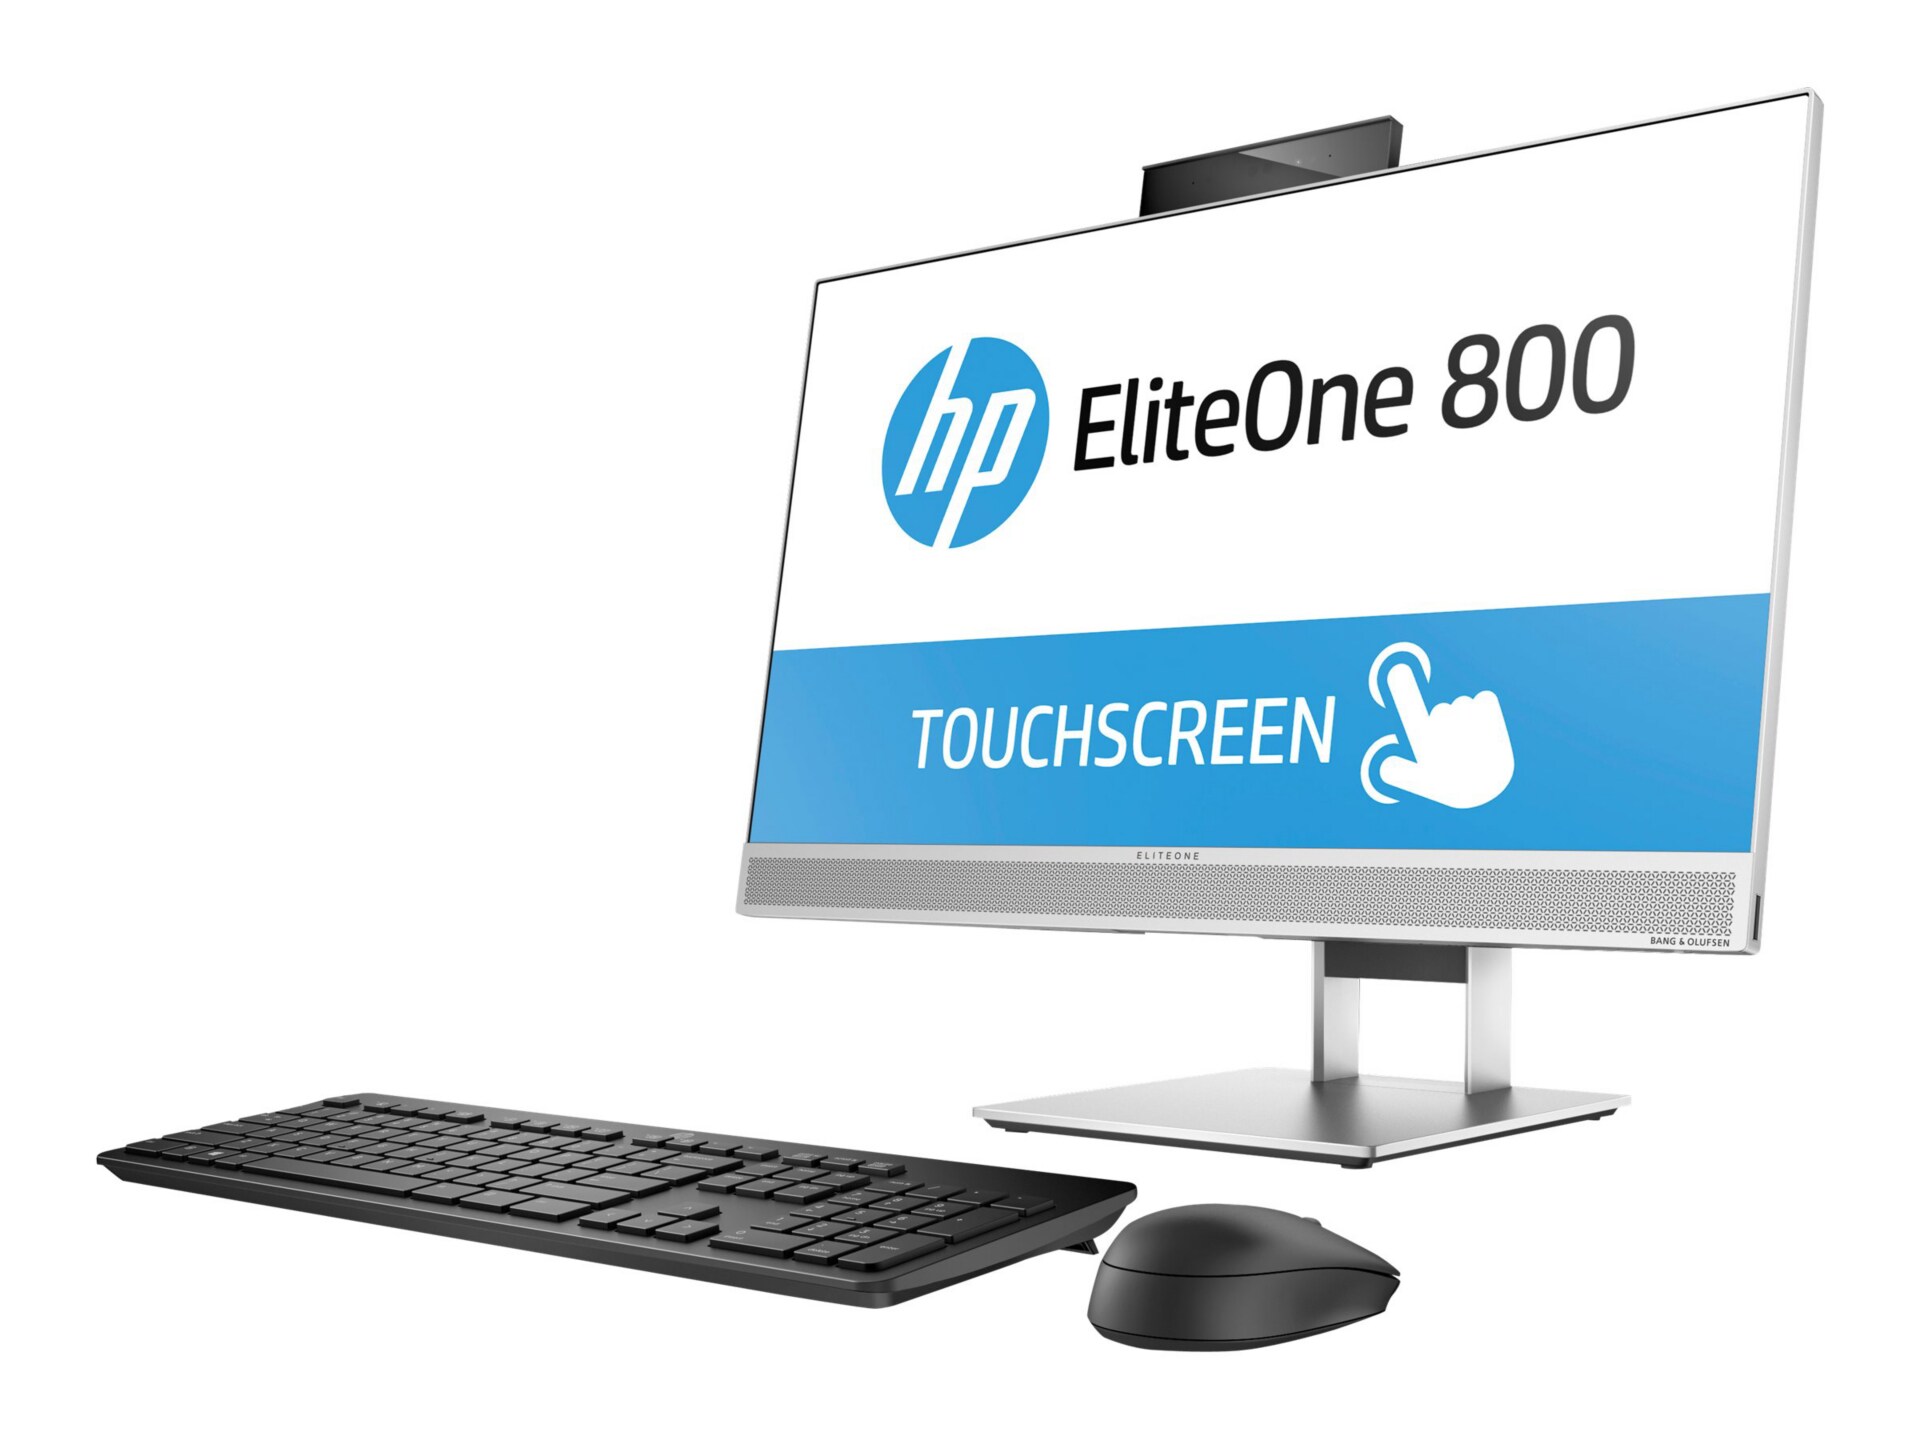 HP EliteOne 800 G3 - all-in-one - Core i7 7700 3.6 GHz - 8 GB - 1 TB - LED 23.8"